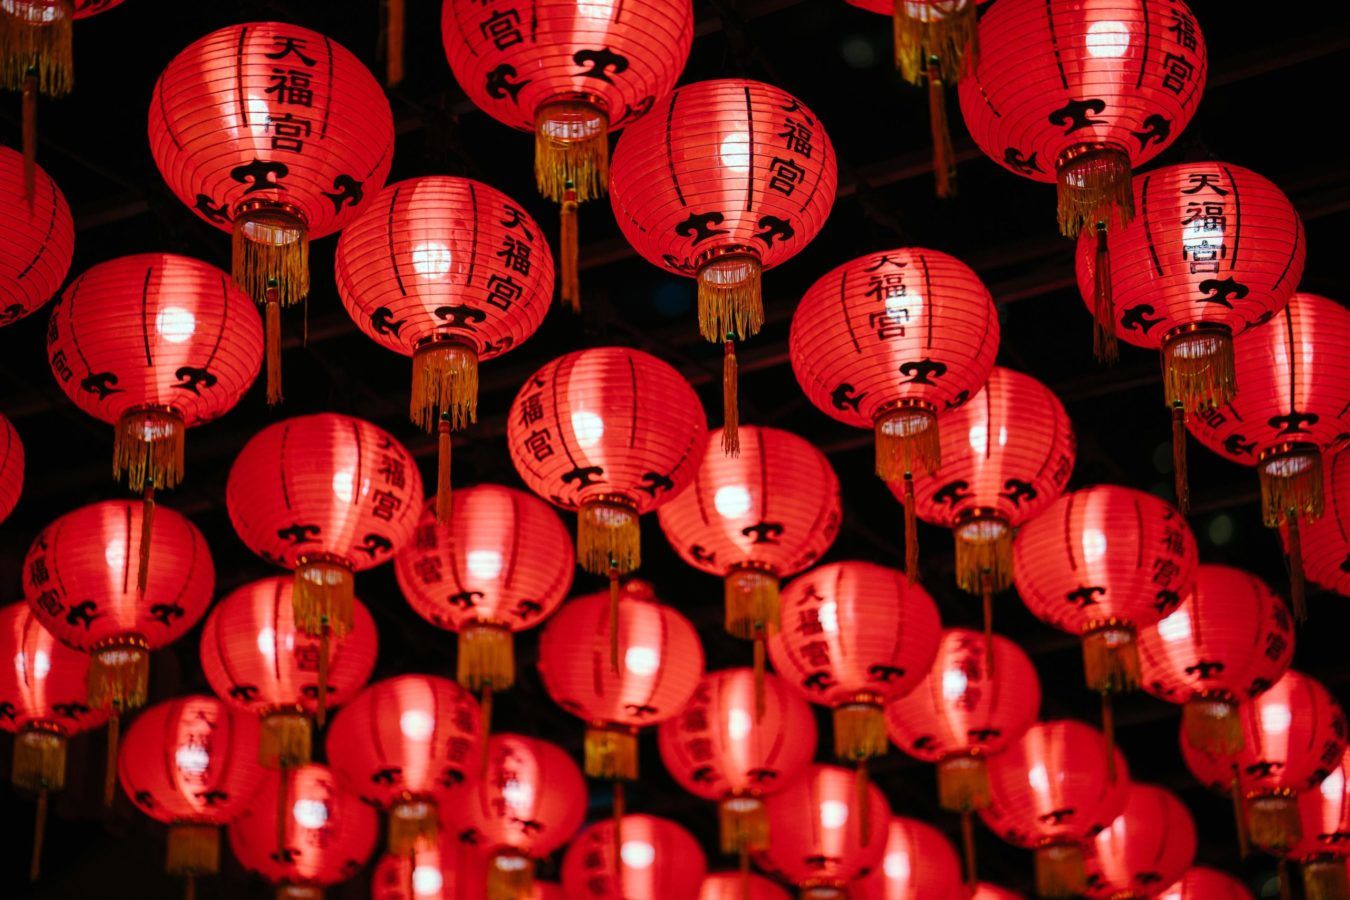 What is the significance of red for Chinese New Year?